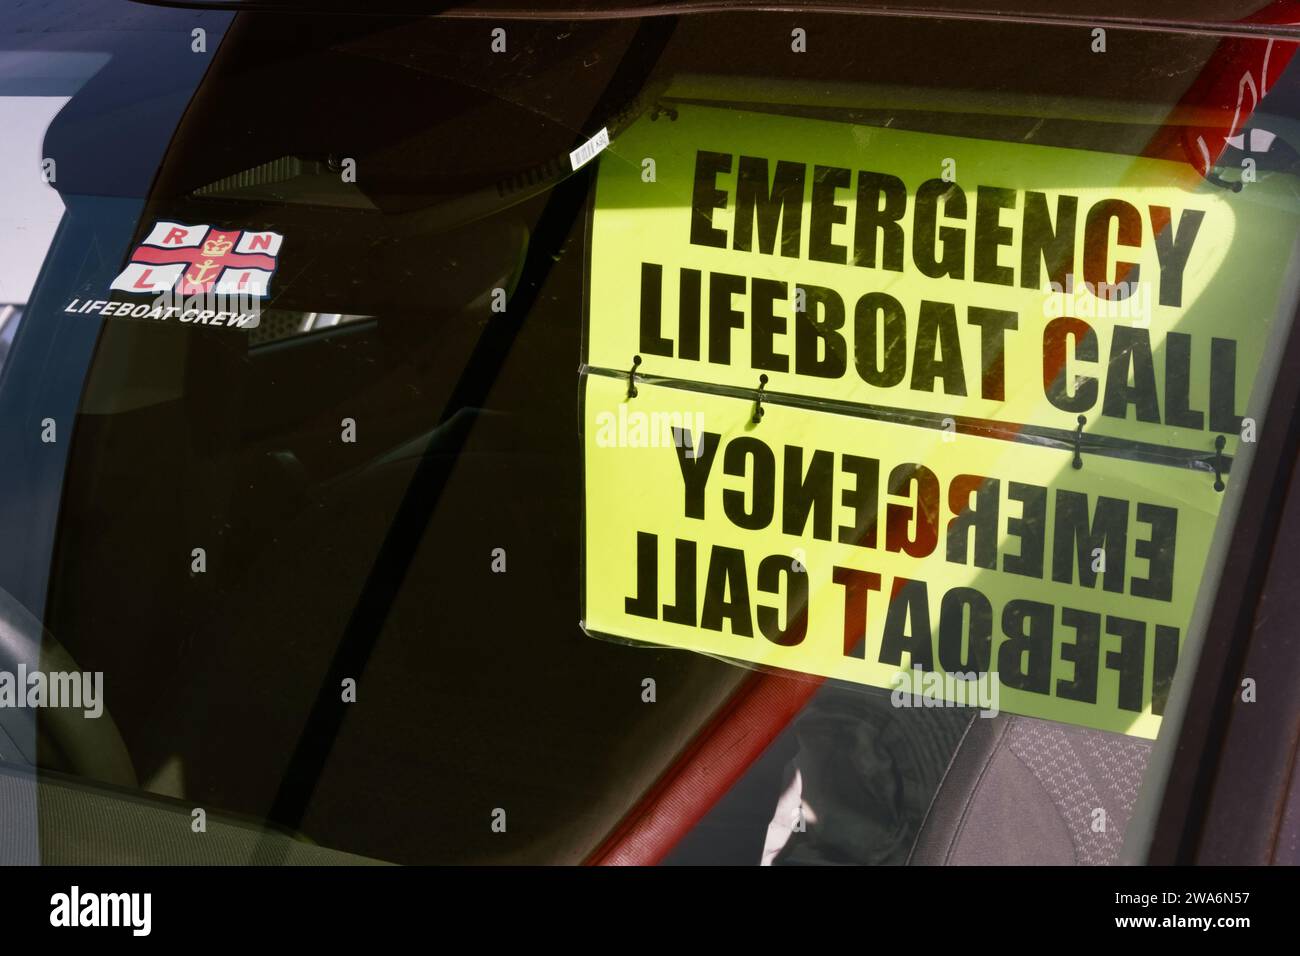 RNLI Lifeboat Crew Windscreen Sticker And Emergency Lifeboat Call Sign Hanging In The Windscreen Of A Car At Mudeford Lifeboat Station Stock Photo